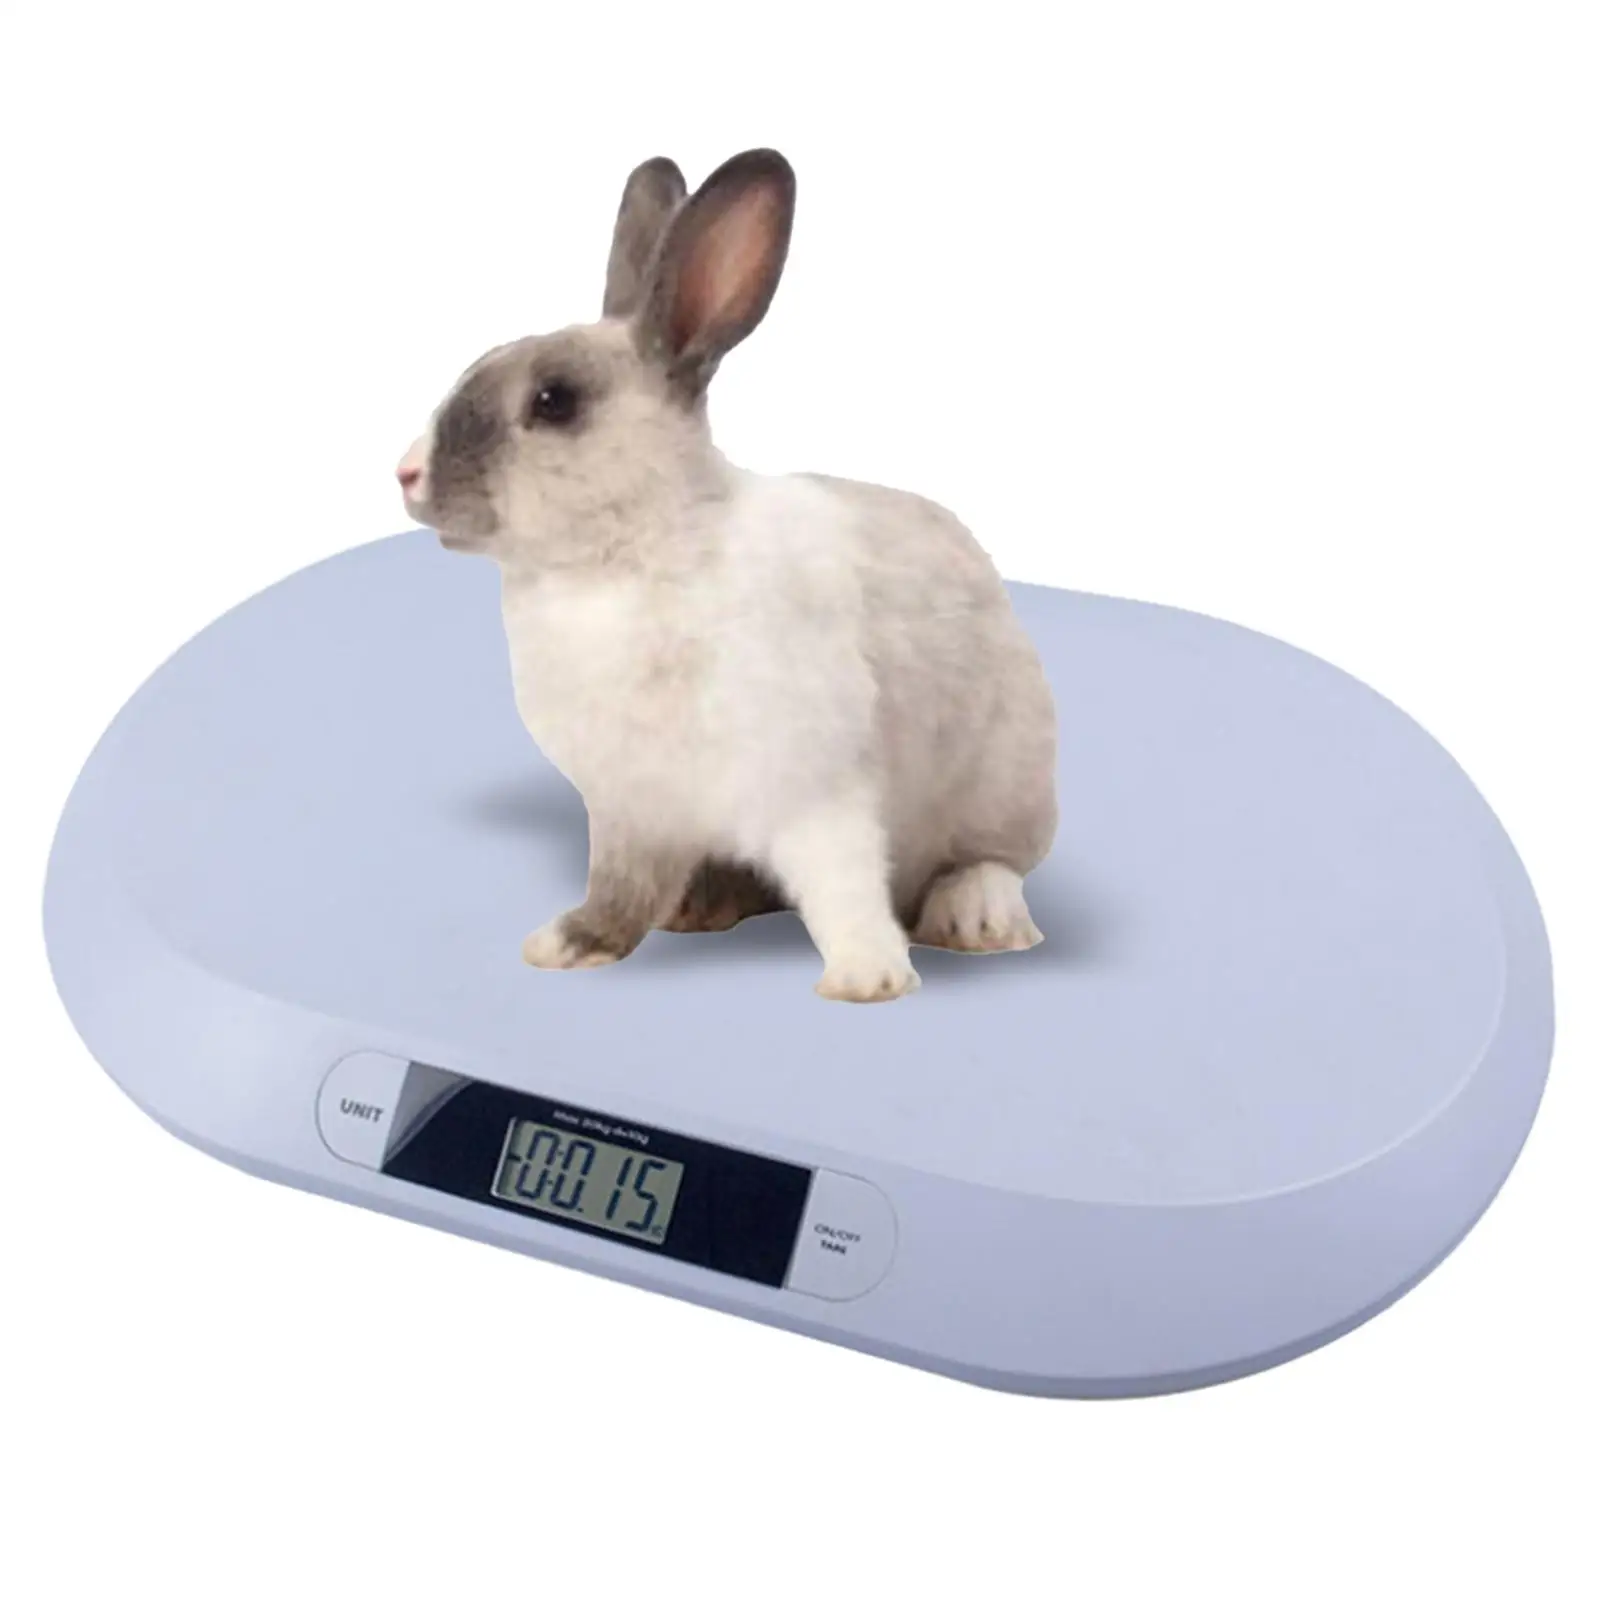 Digital Baby Scale 20kg Multifunction Accurate Comfort LCD Display Weigh Meter for Dogs Animals Toddlers Newborns Infants